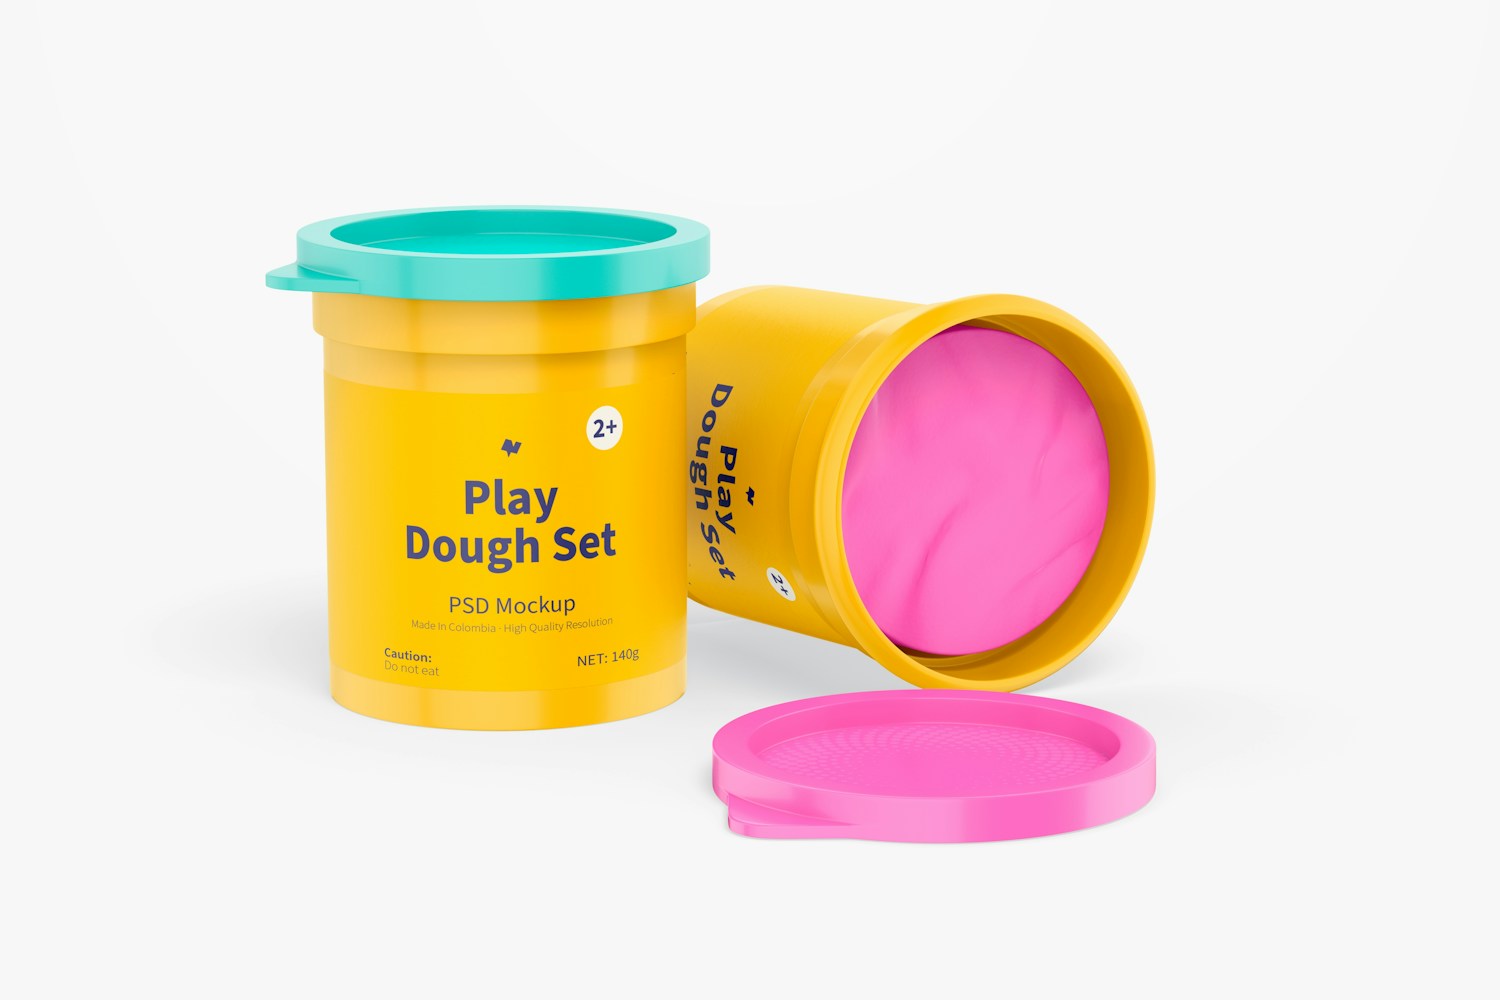 Play Dough Set Mockup, Opened and Closed